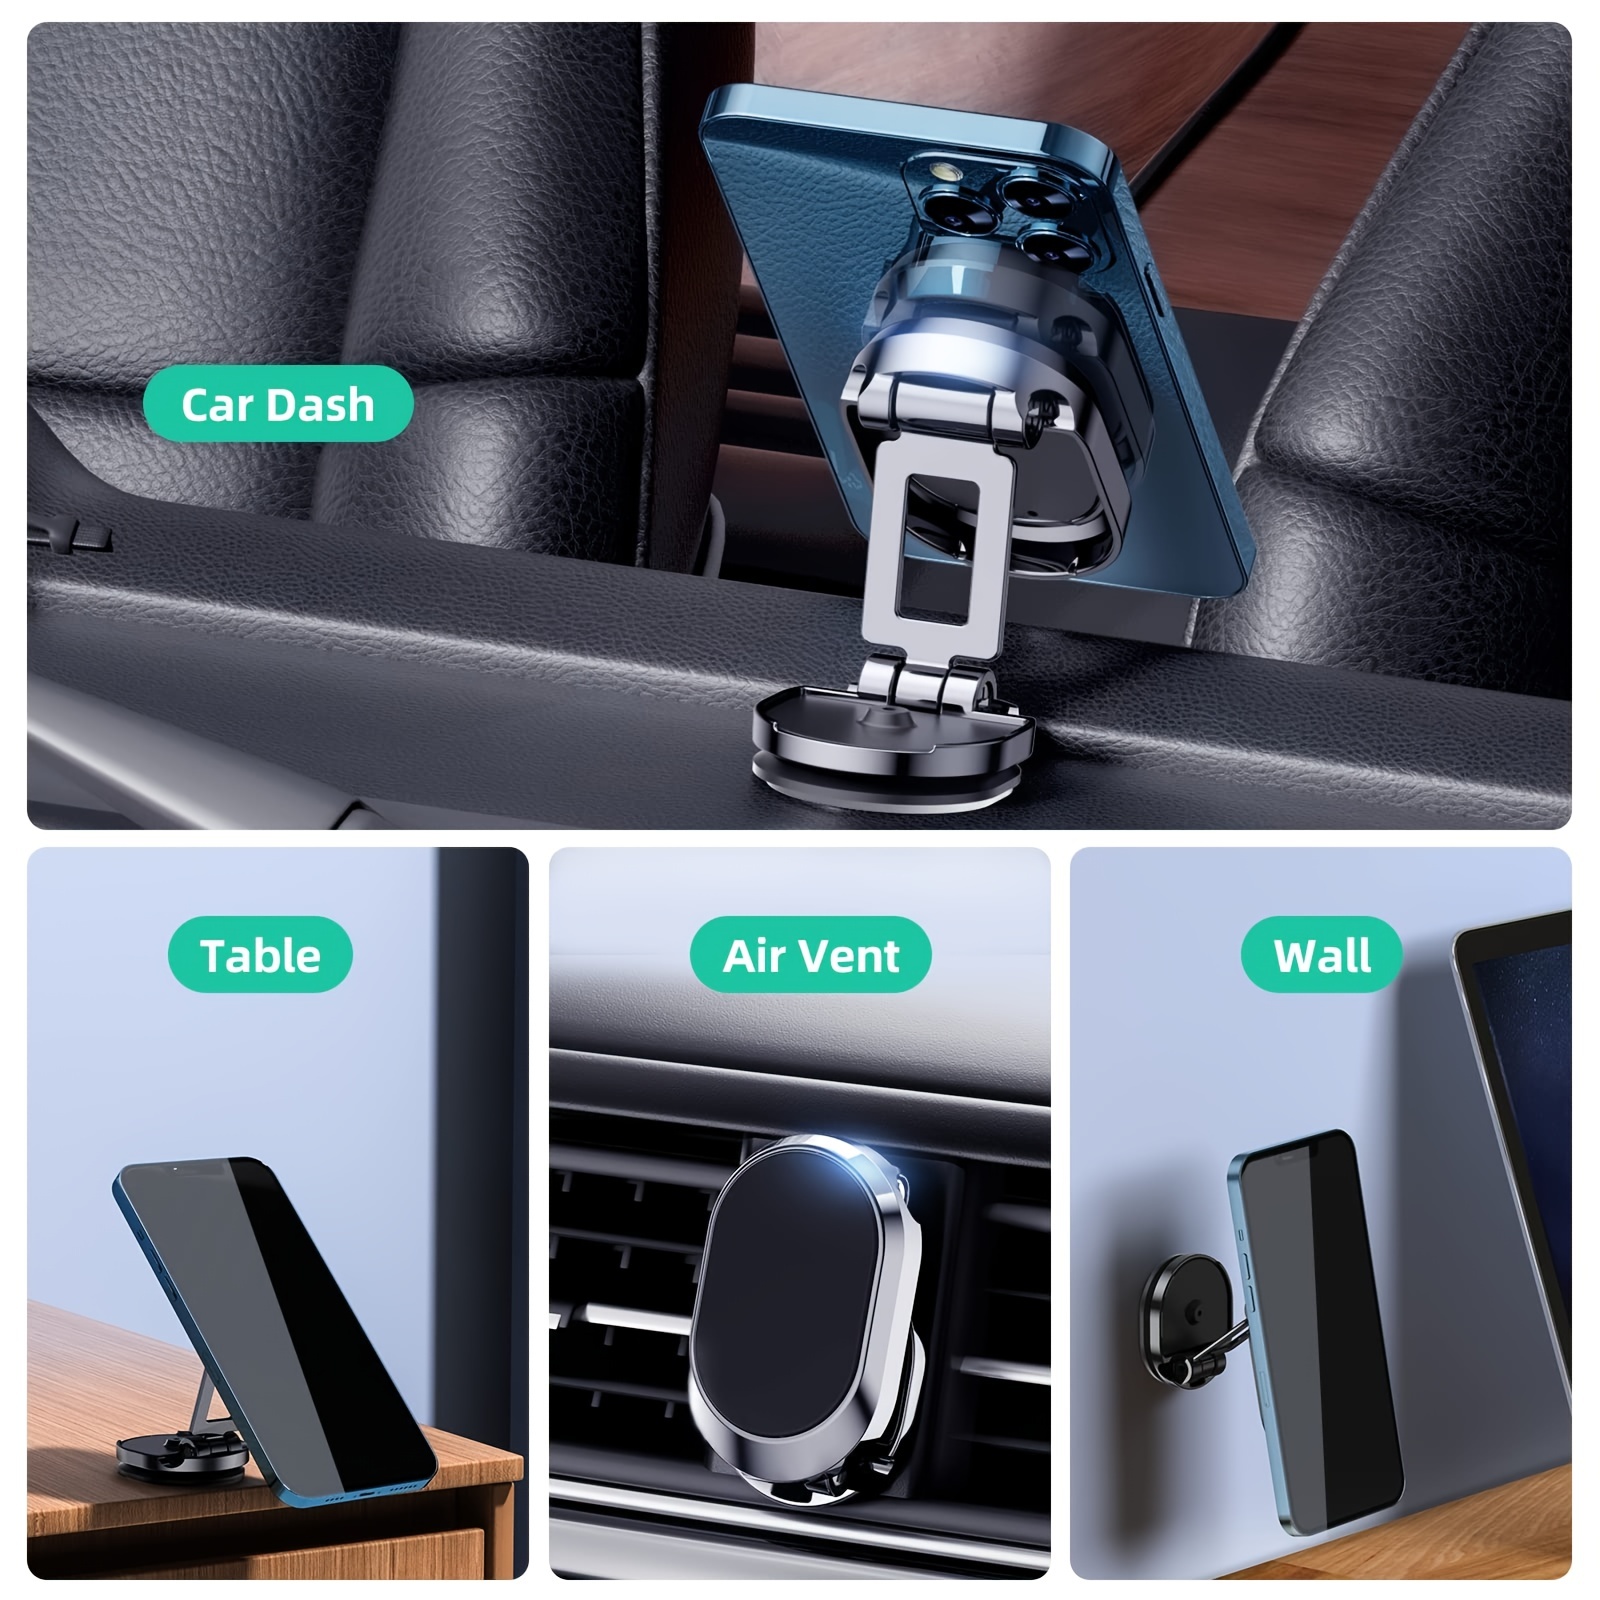 magnetic car phone holder mount alloy folding magnetic car phone holder for car dashboard 360 adjustable car phone mount for all smartphones with 2 iron sheets and 2 mobile phone protective films details 2